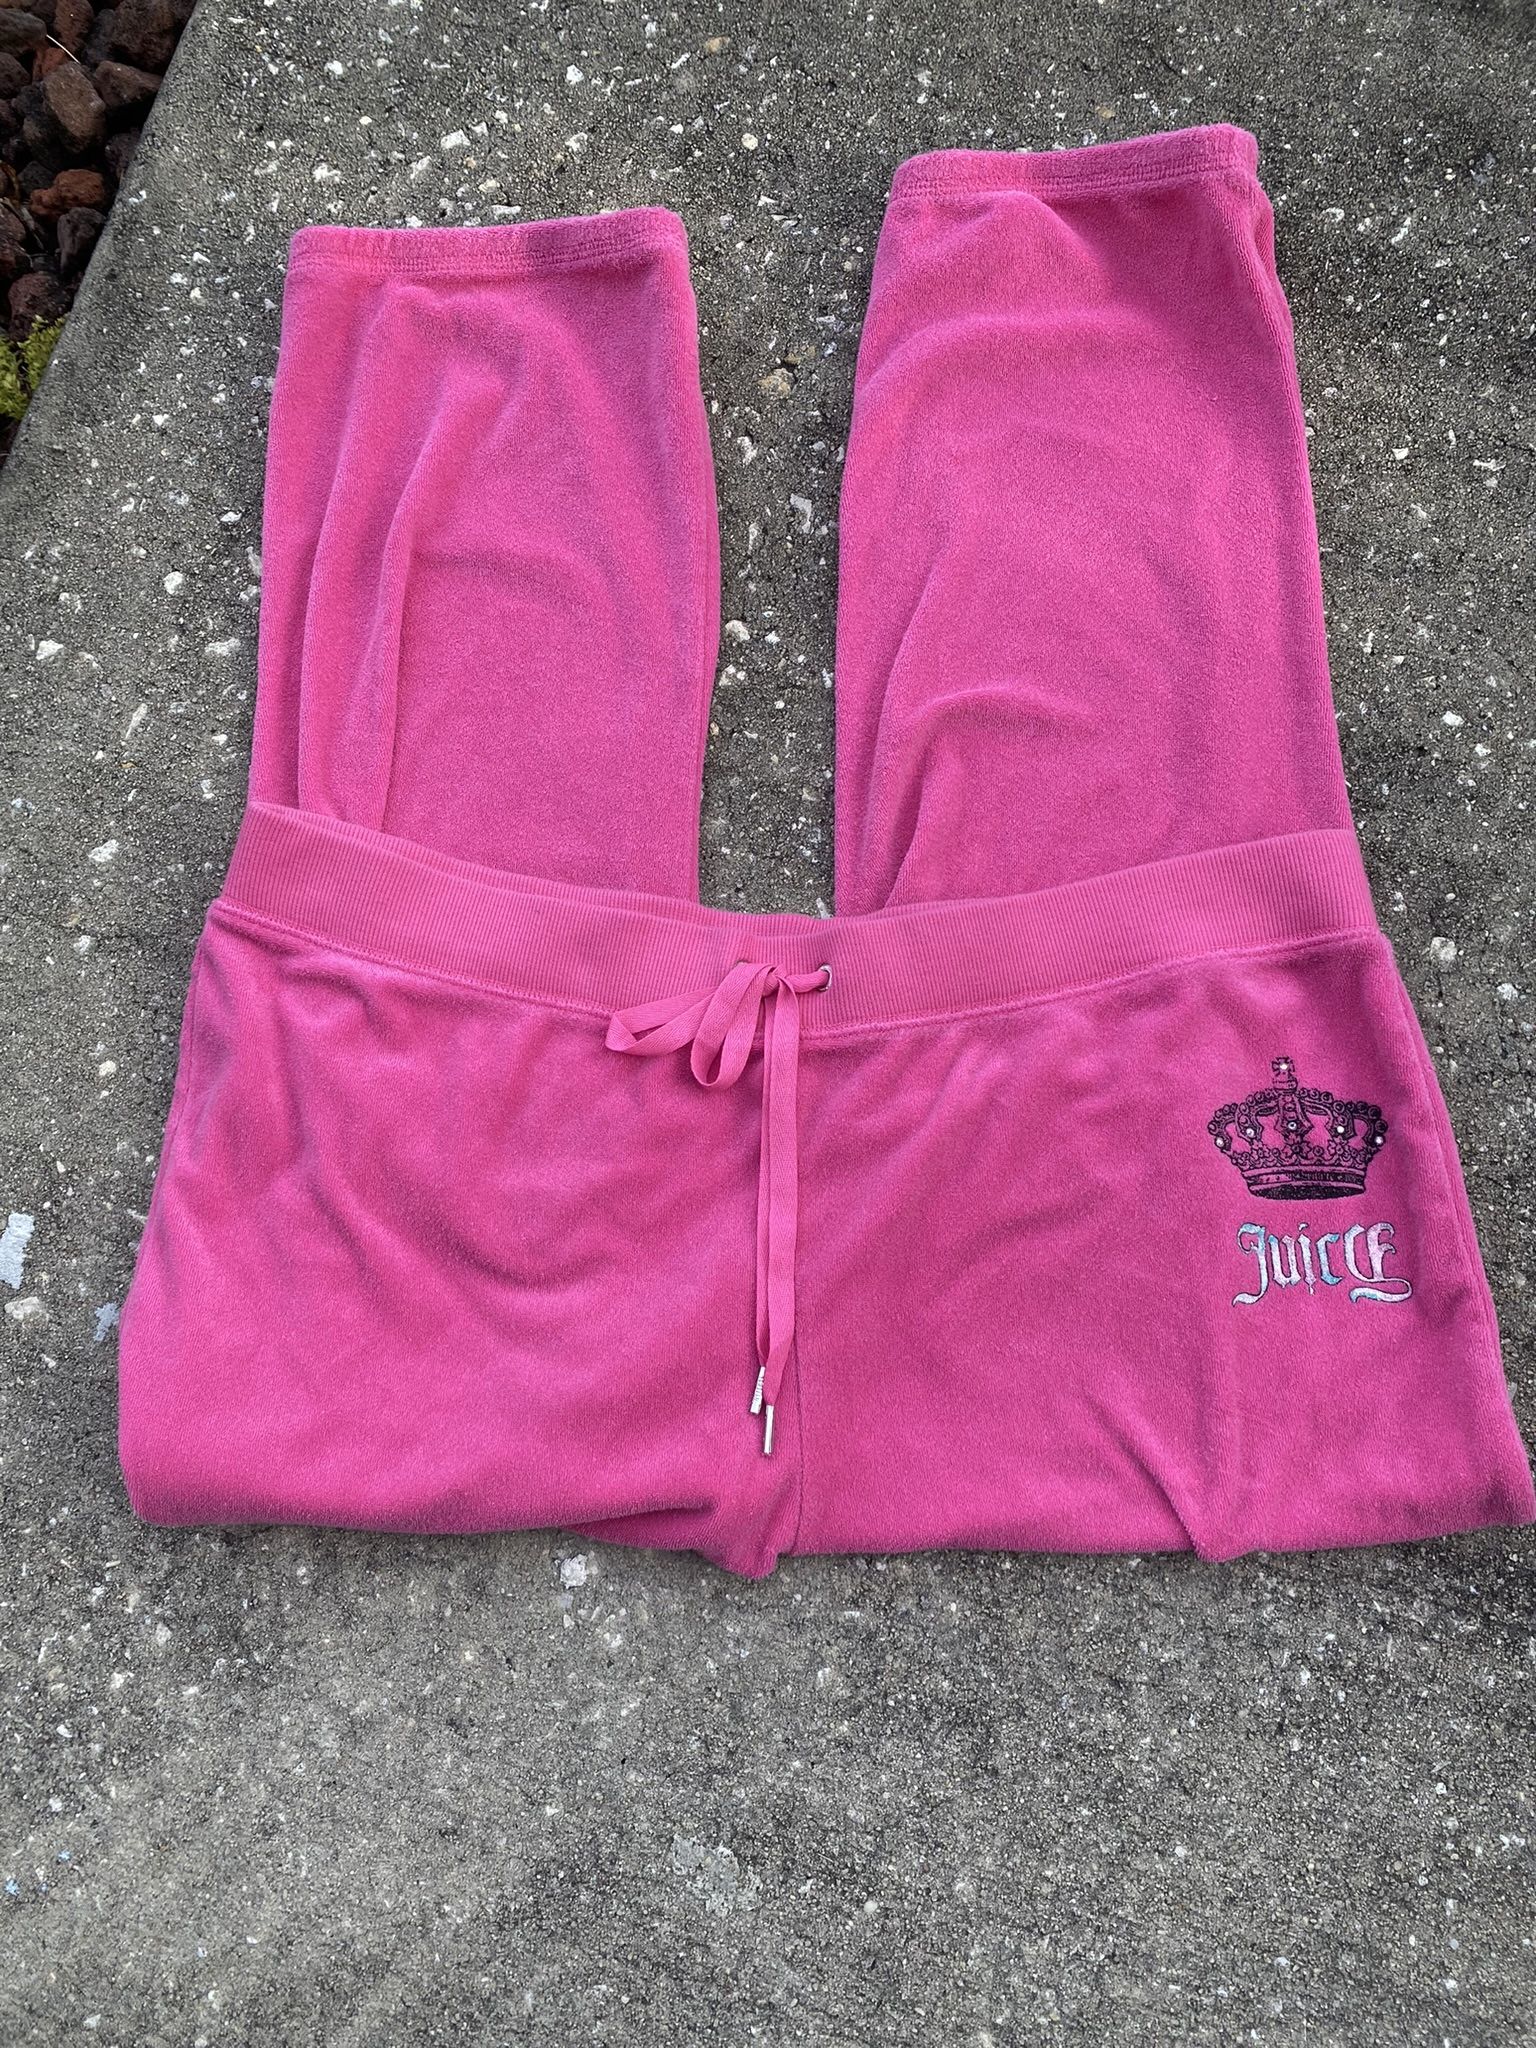 Juicy Couture Terry Cloth Hot Pink Sweat Pants/capris